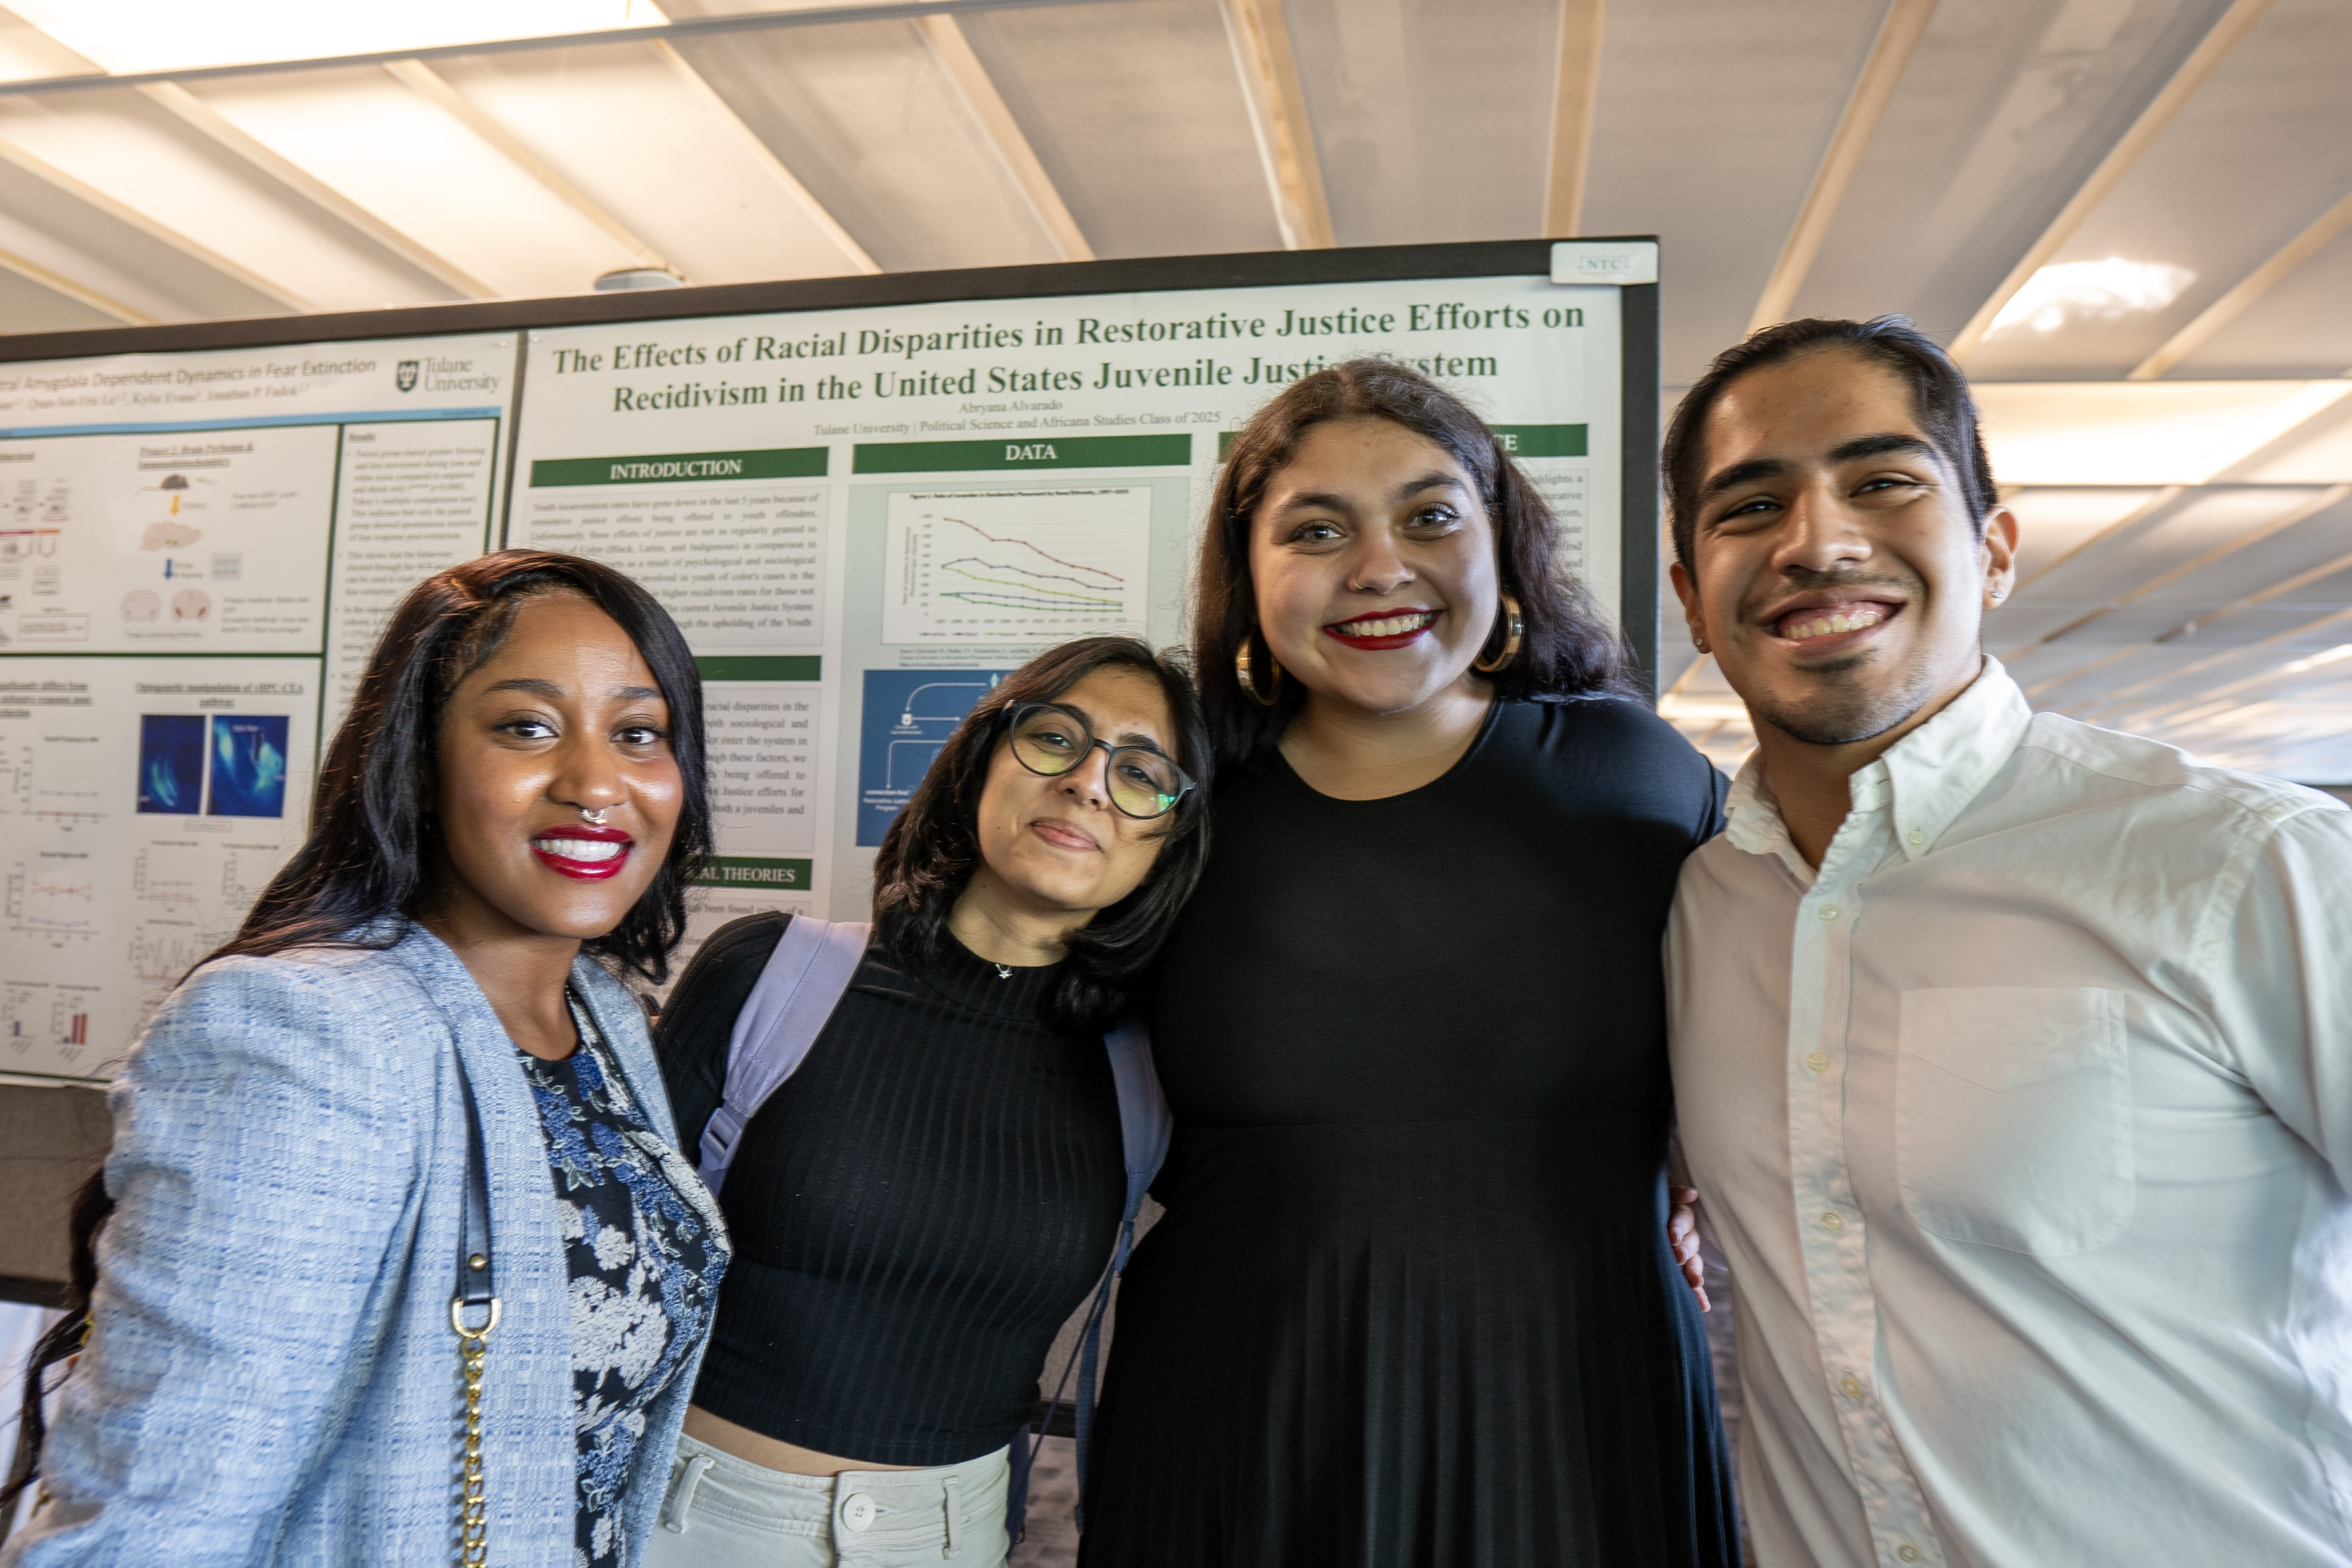 Summer Research Institute for Racial Equity